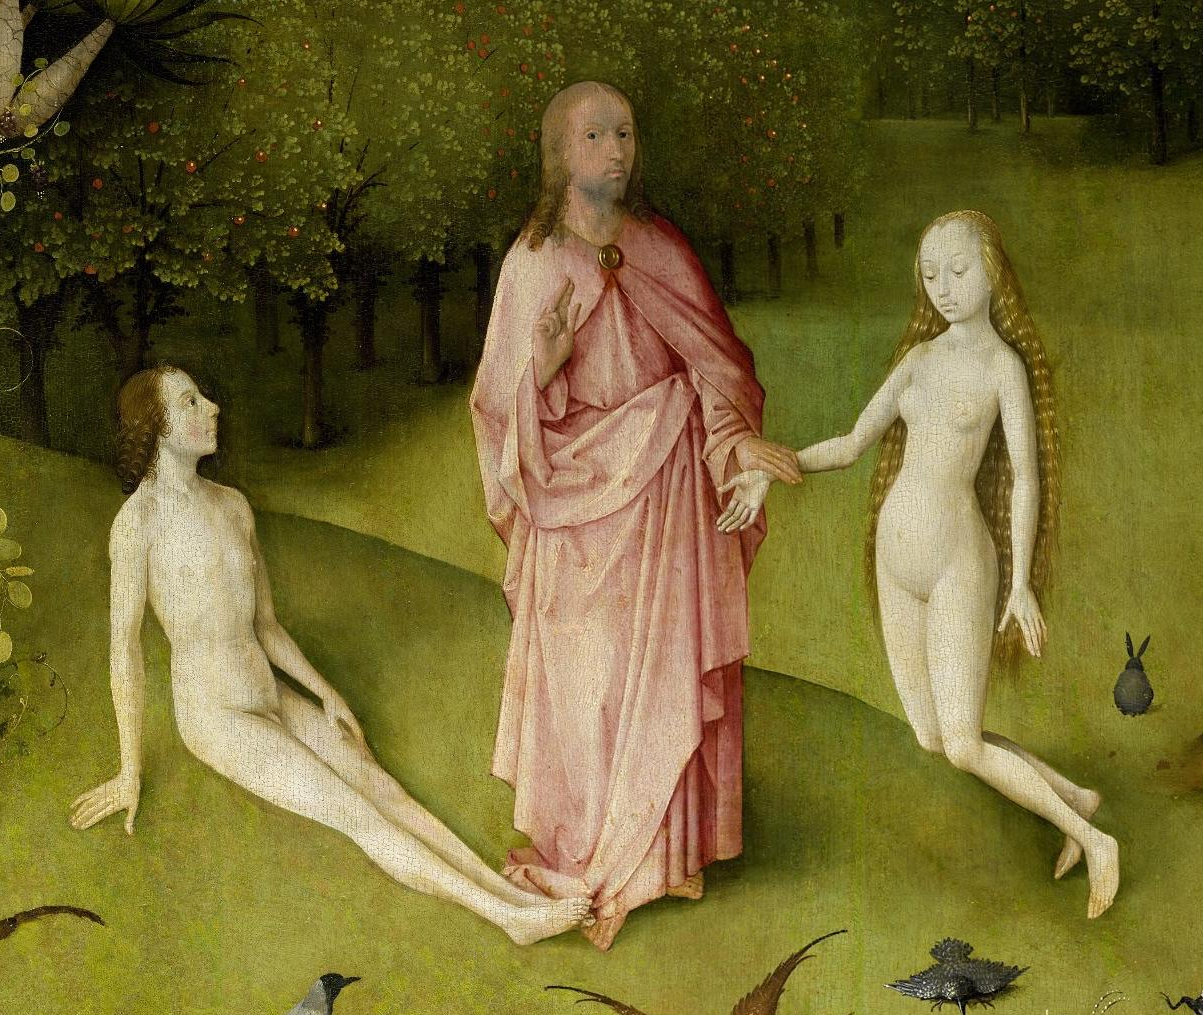 Hieronymus Bosch, The Garden of Earthly Delights (Detail of Adam and Eve), oil on oak plank, 1500-05 (Museo Nacional del Prado, Madrid). Photo: Public Domain.